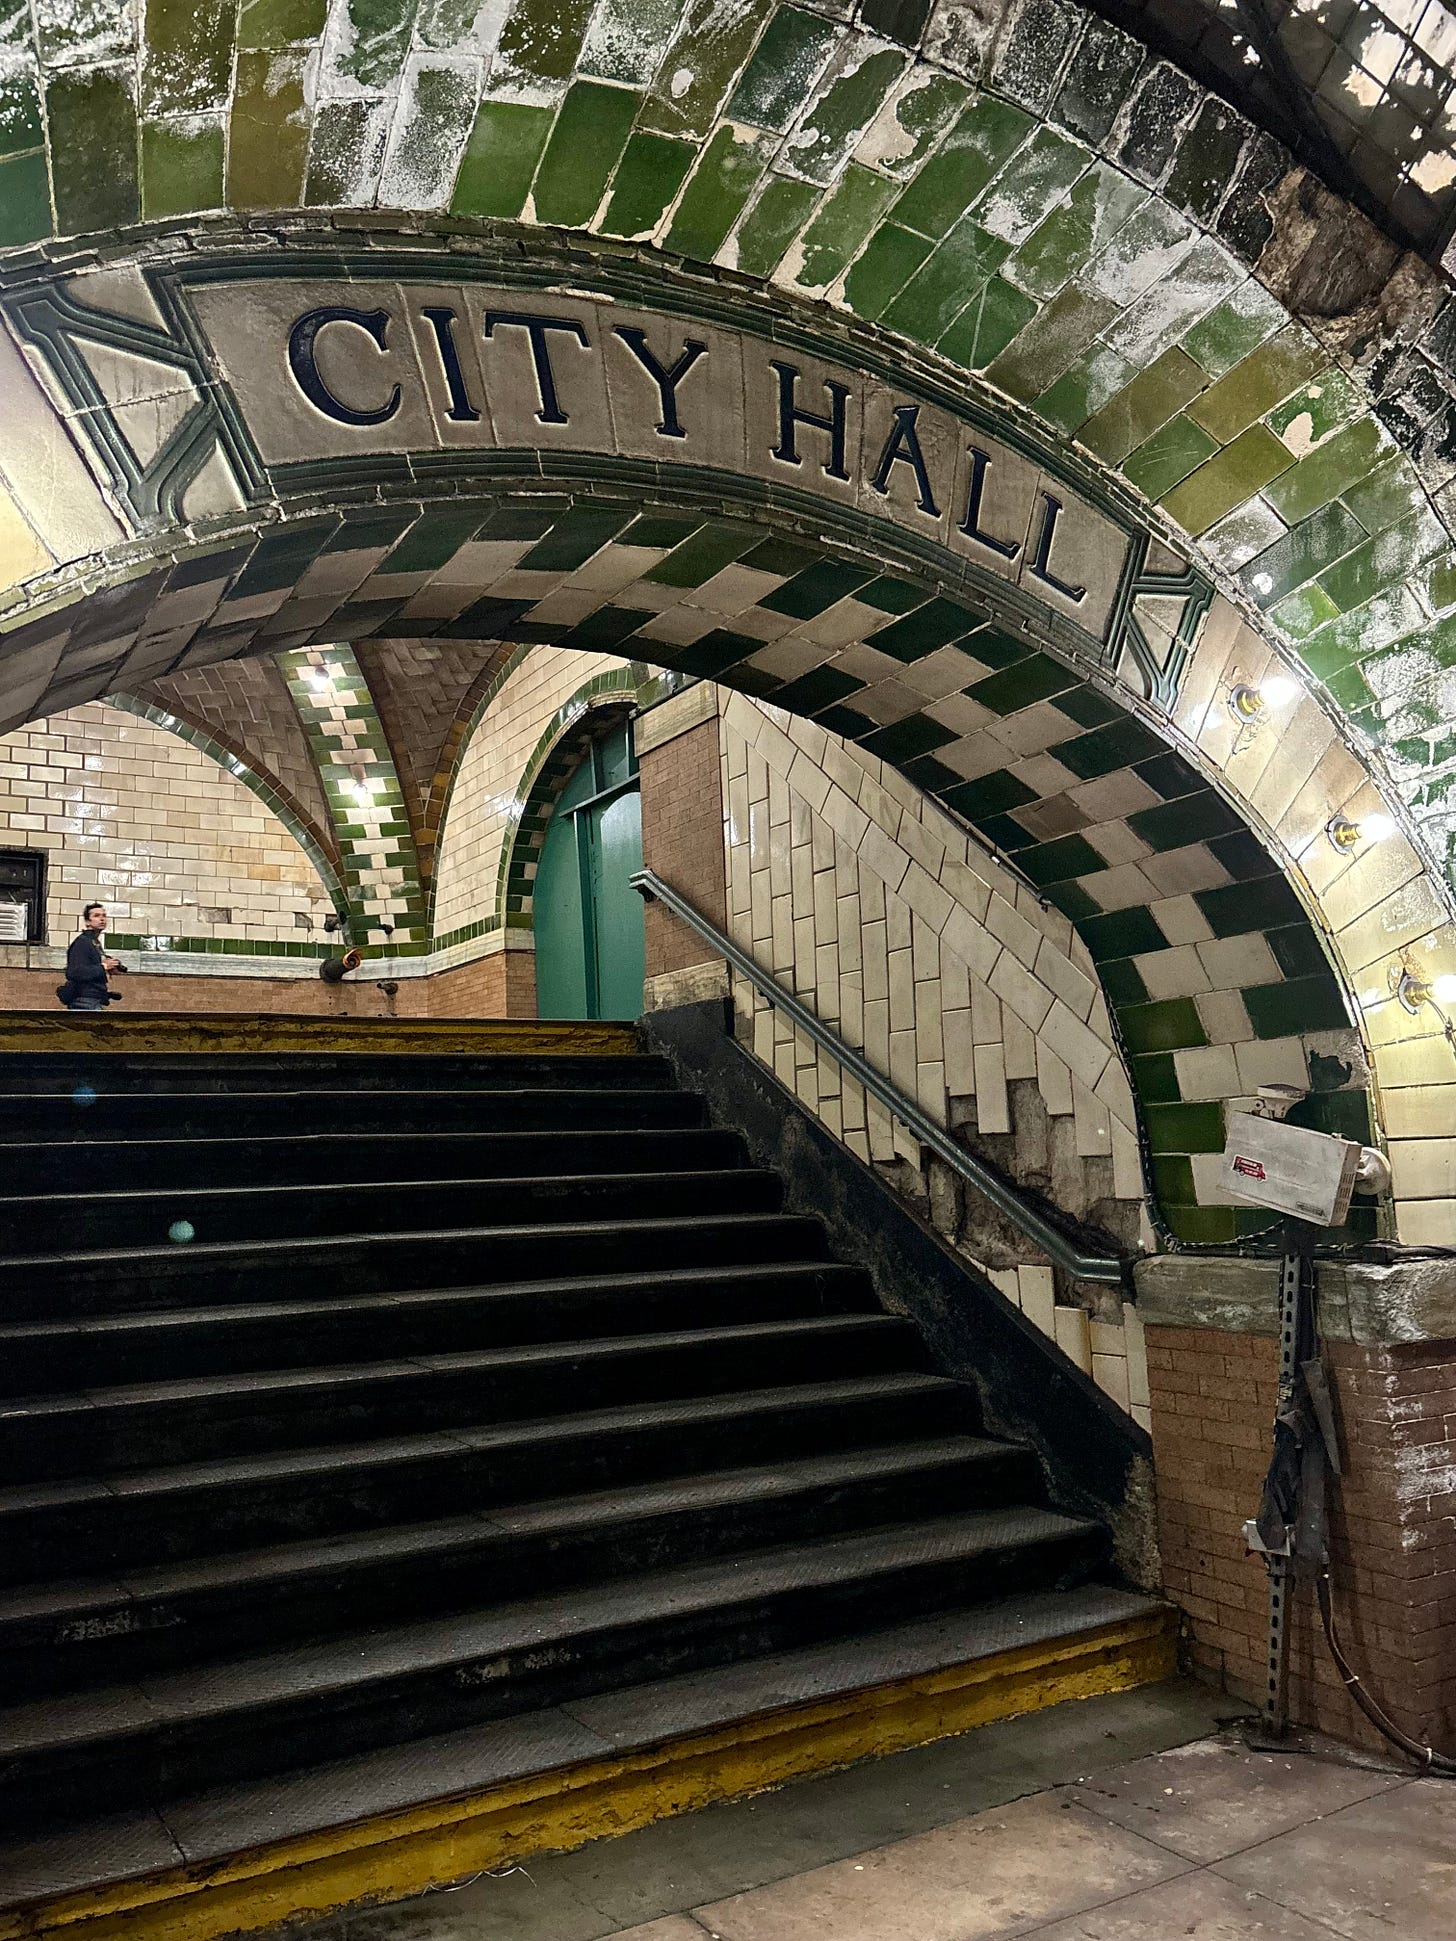 A green-tiled arch labeled City Hall over that same stairway.